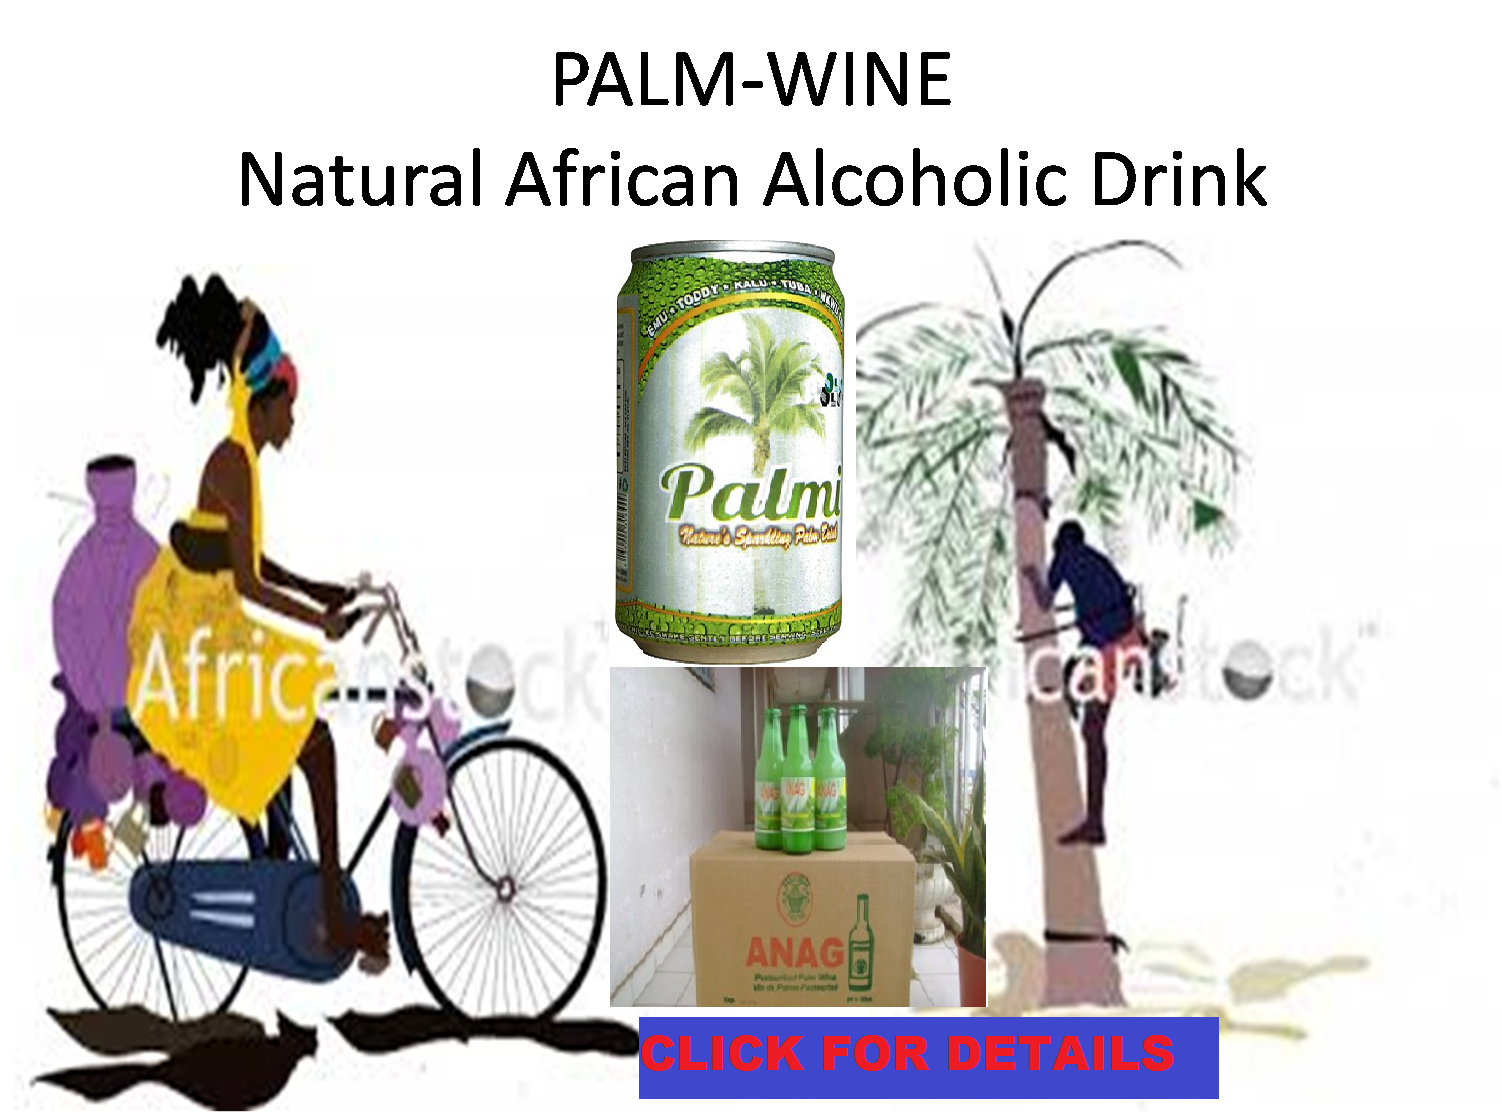 PALM WINE BOTTLING AND PRESERVATION (COMMERCIAL PASTEURIZATION OF PALM